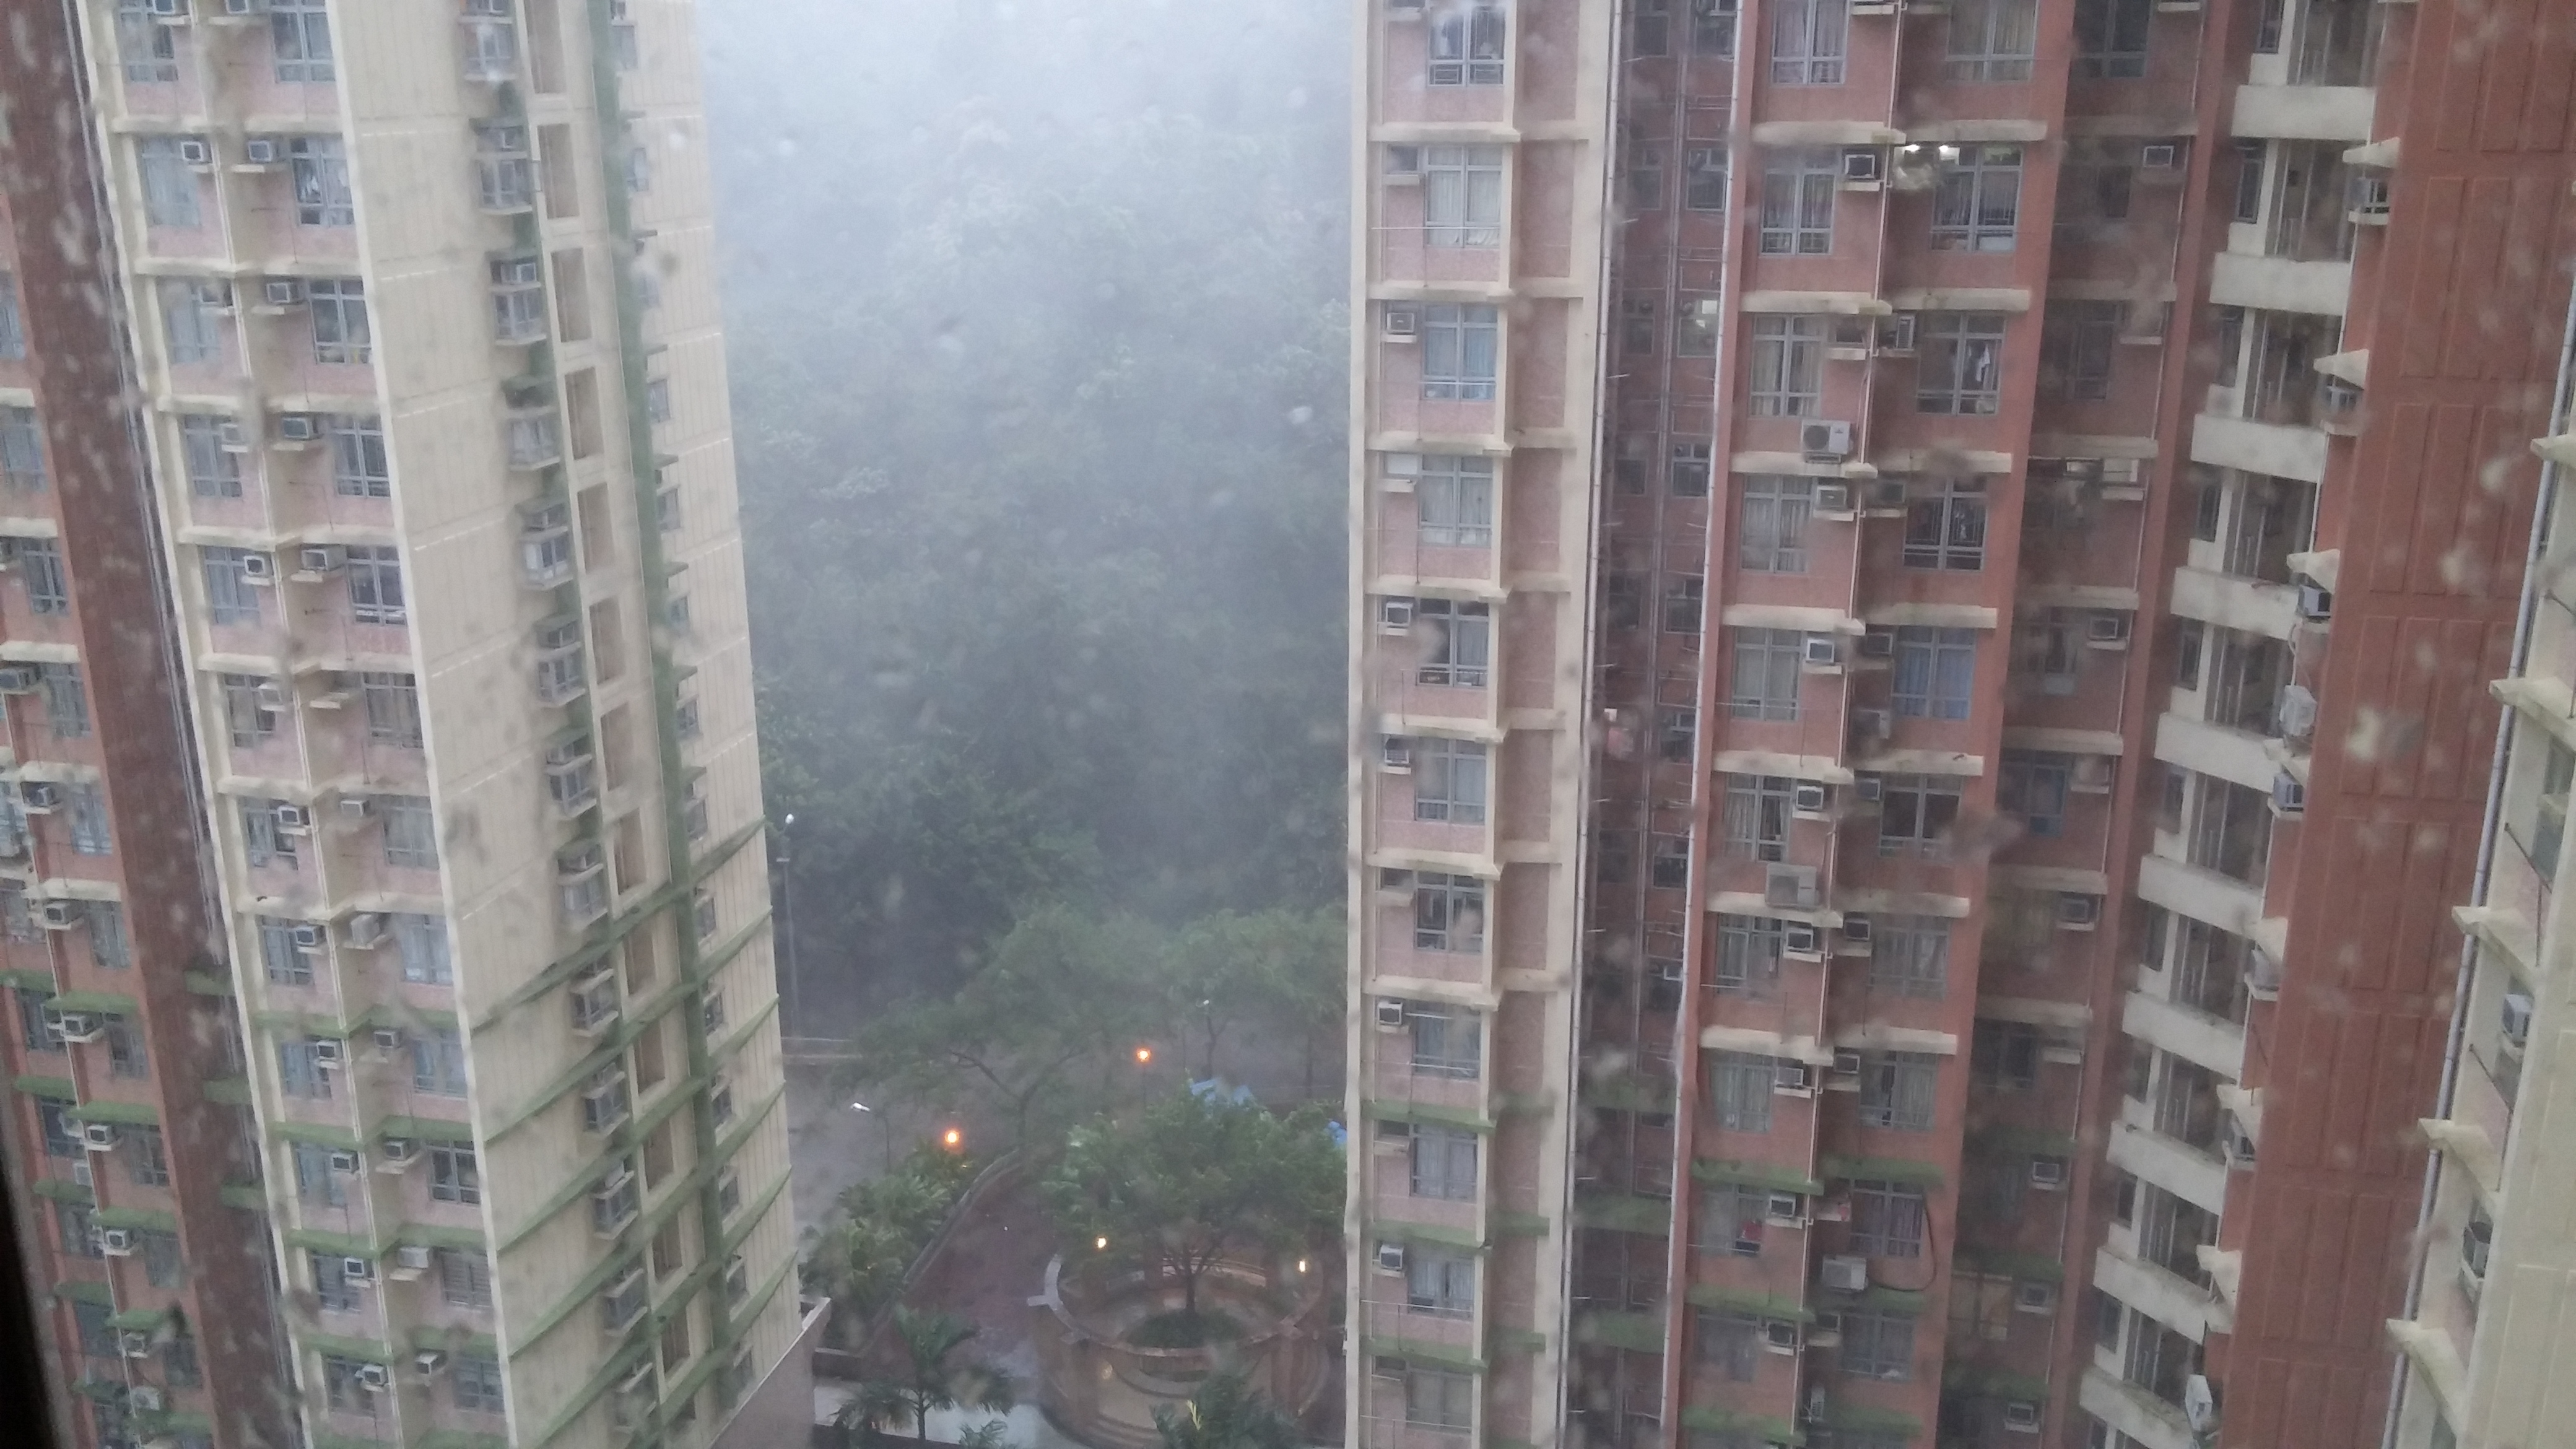 Typhoon makes the outdoors to be very dangerous